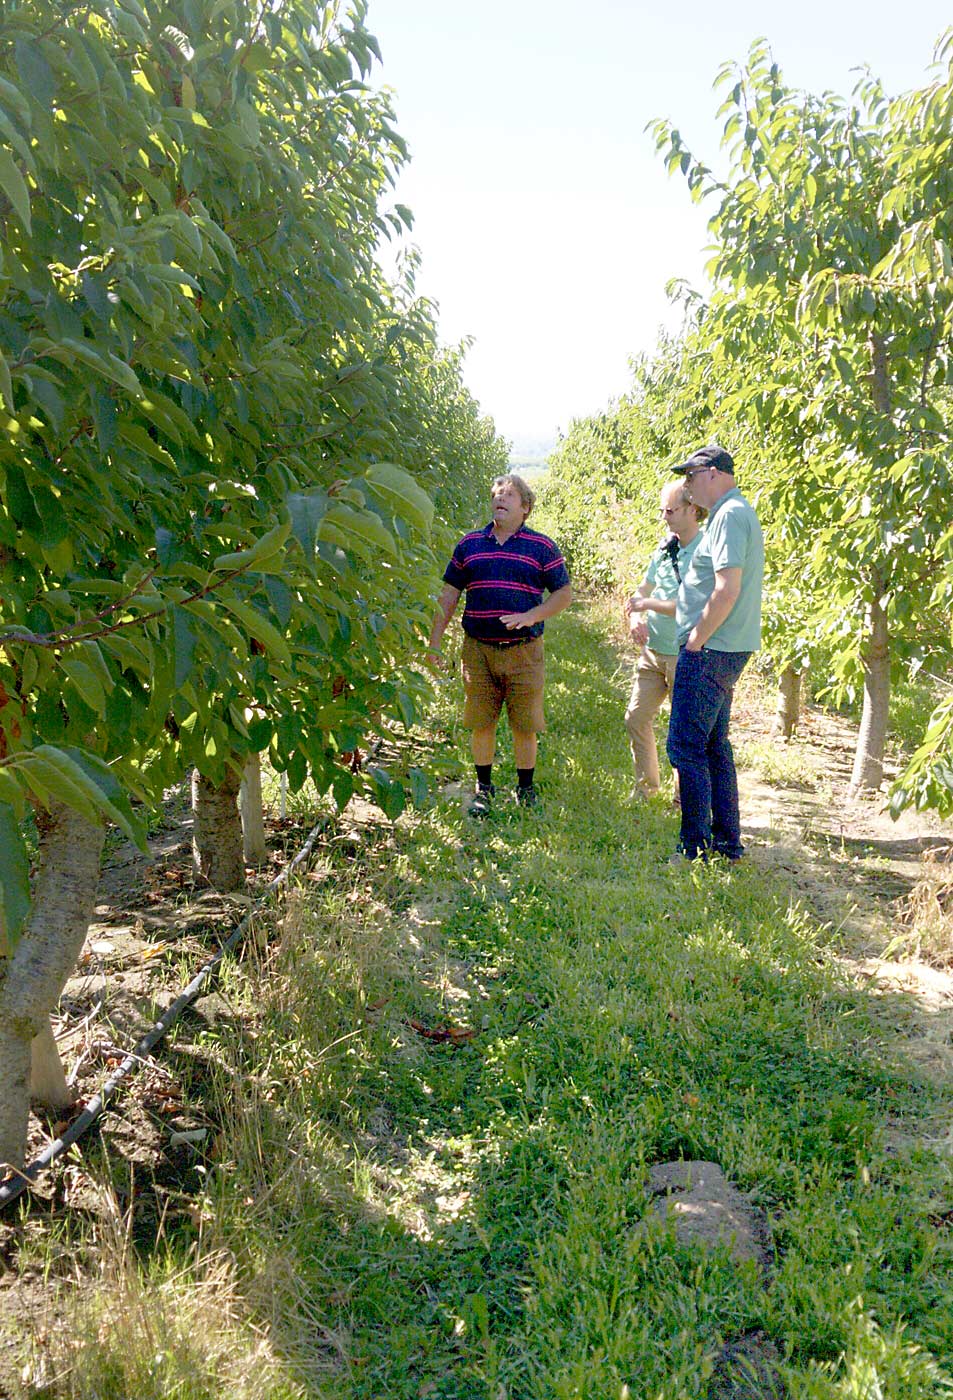 Yakima Valley cherry grower Mark Hanrahan gives two Dutch agricultural innovators, Marcel van Haren and Peter Frans de Jong, a tour of his orchards last September. Growers in the Netherlands and in Washington face similar challenges in terms of labor and need for automation, de Jong said, so it makes sense to collaborate on technology development. (Courtesy Ines Hanrahan)